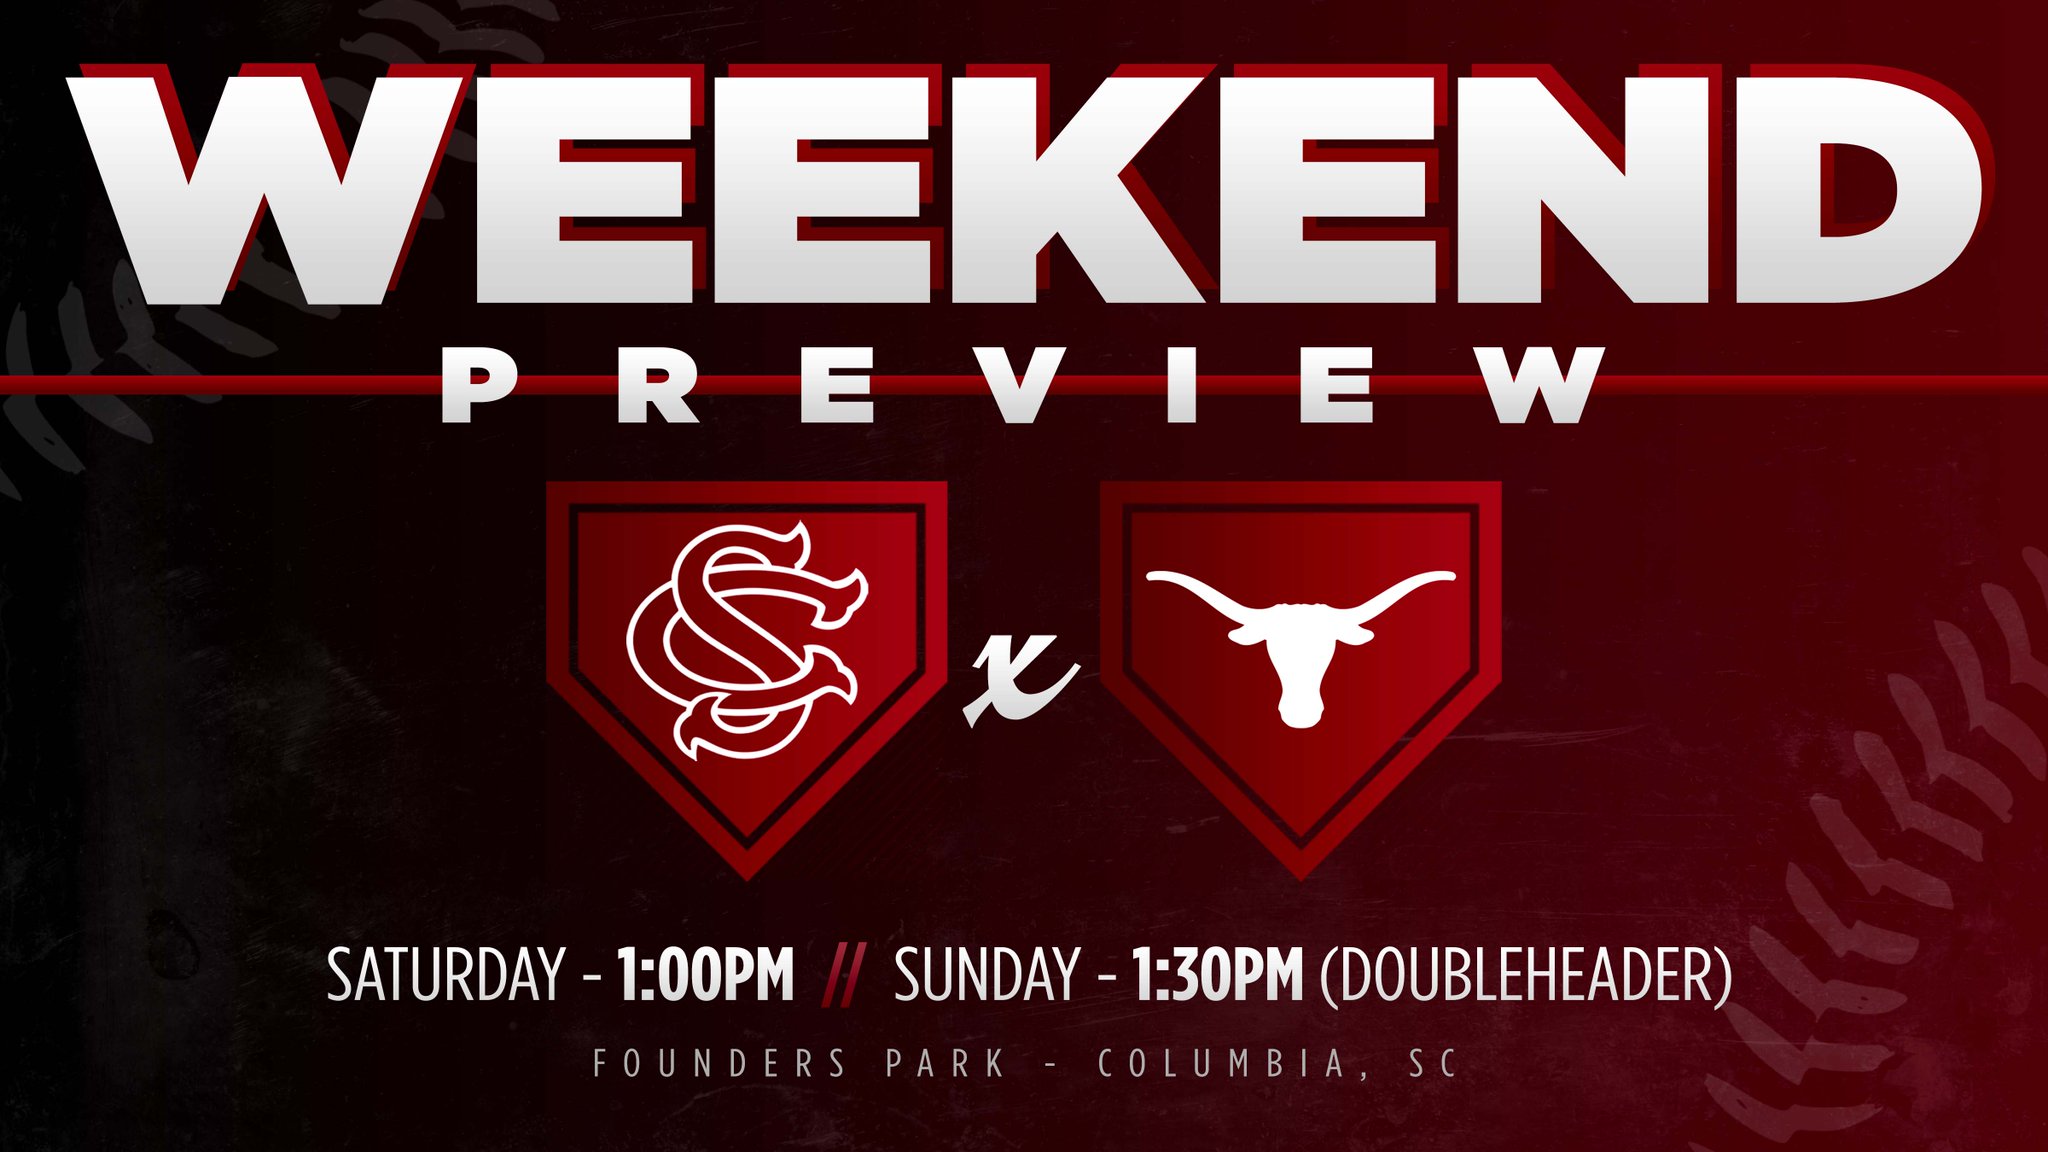 Gamecock Baseball on Twitter "FULL WEEKEND SCHEDULE Saturday 1 p.m